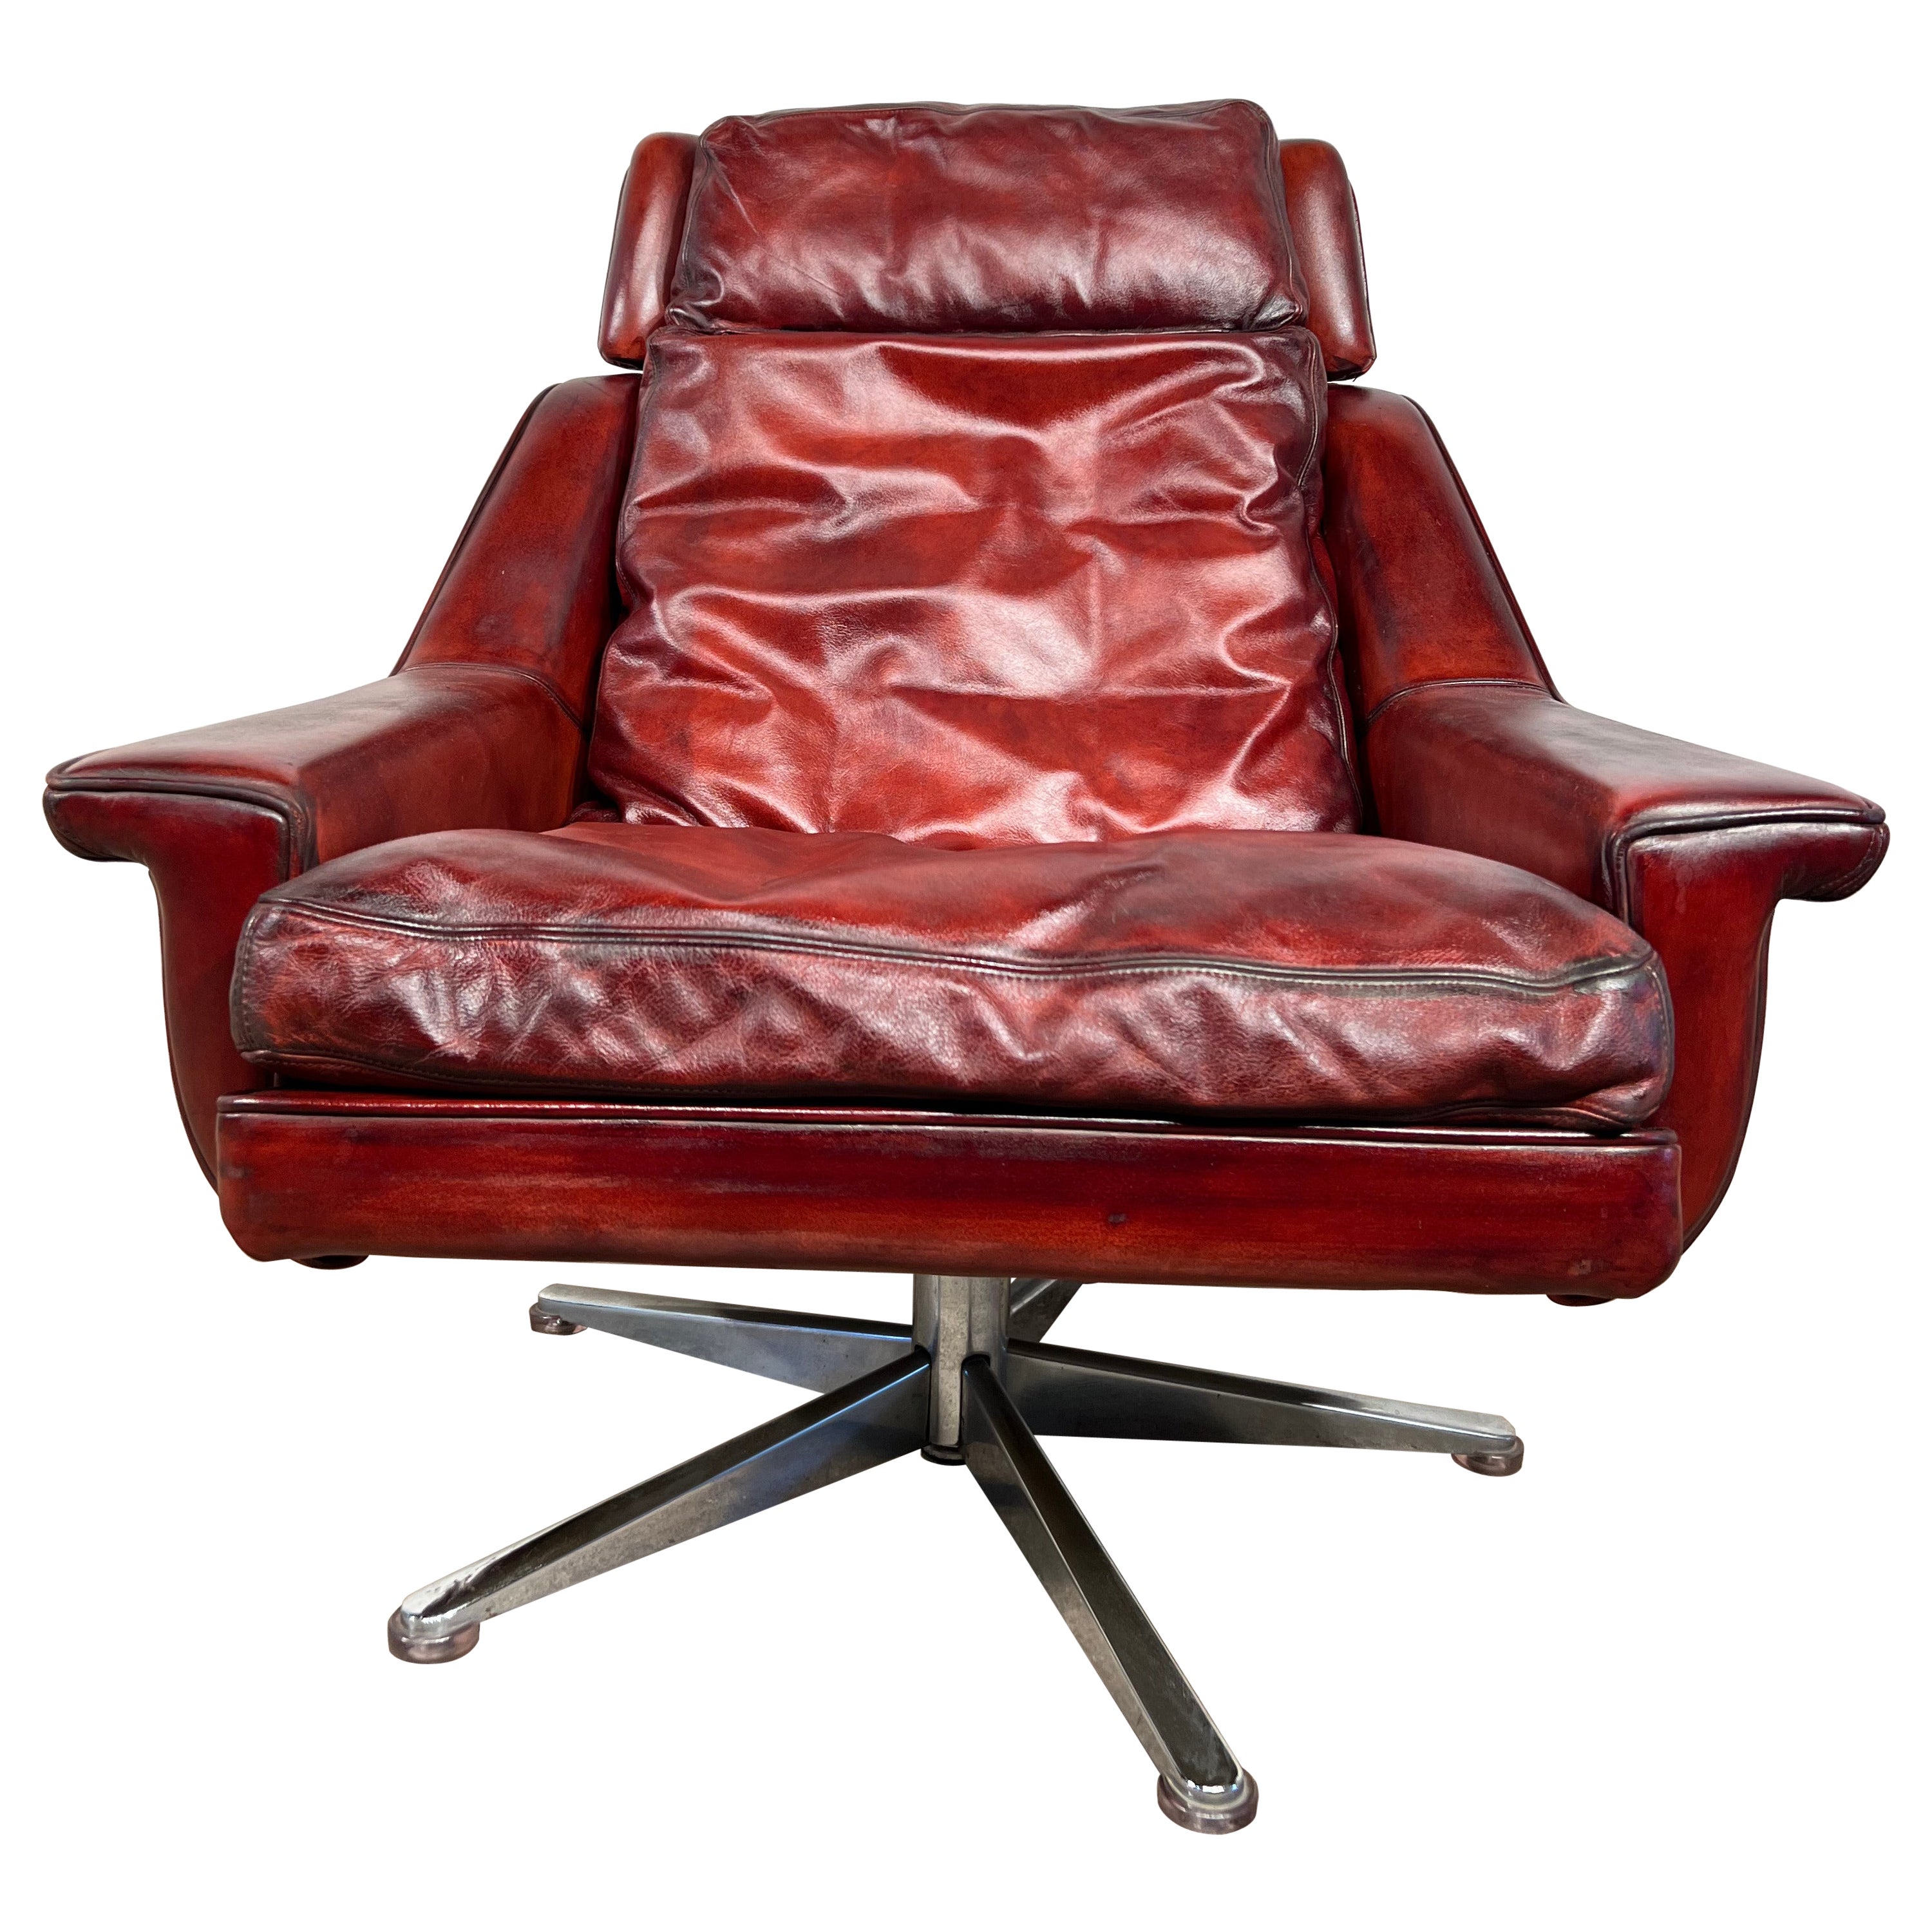 Great Quality Esa Vintage Danish 1970 Swivel ArmChair Patinated Deep Red #595